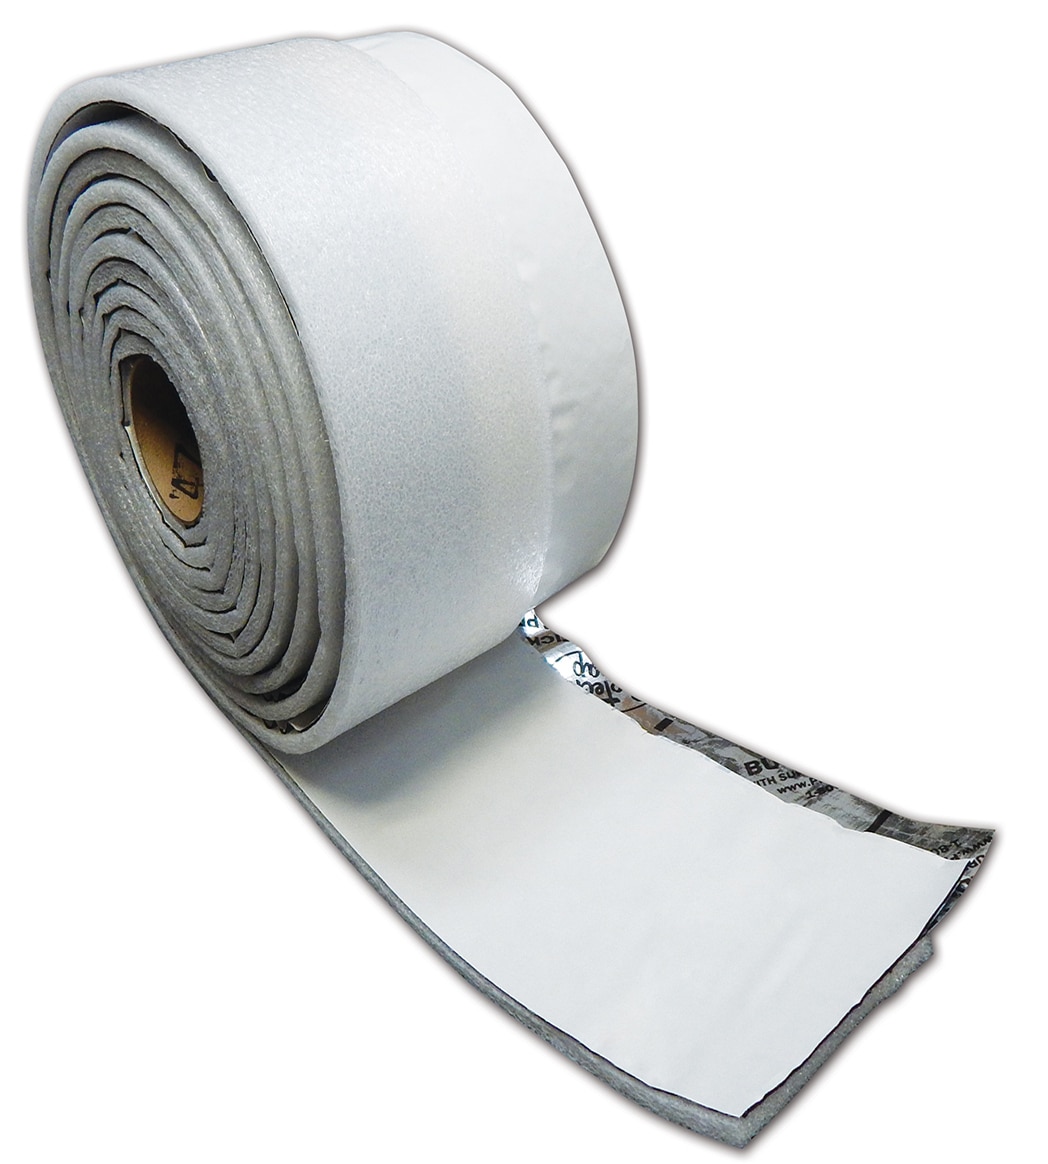 ZIP System 90-ft Panel System Tape in the OSB Tape department at